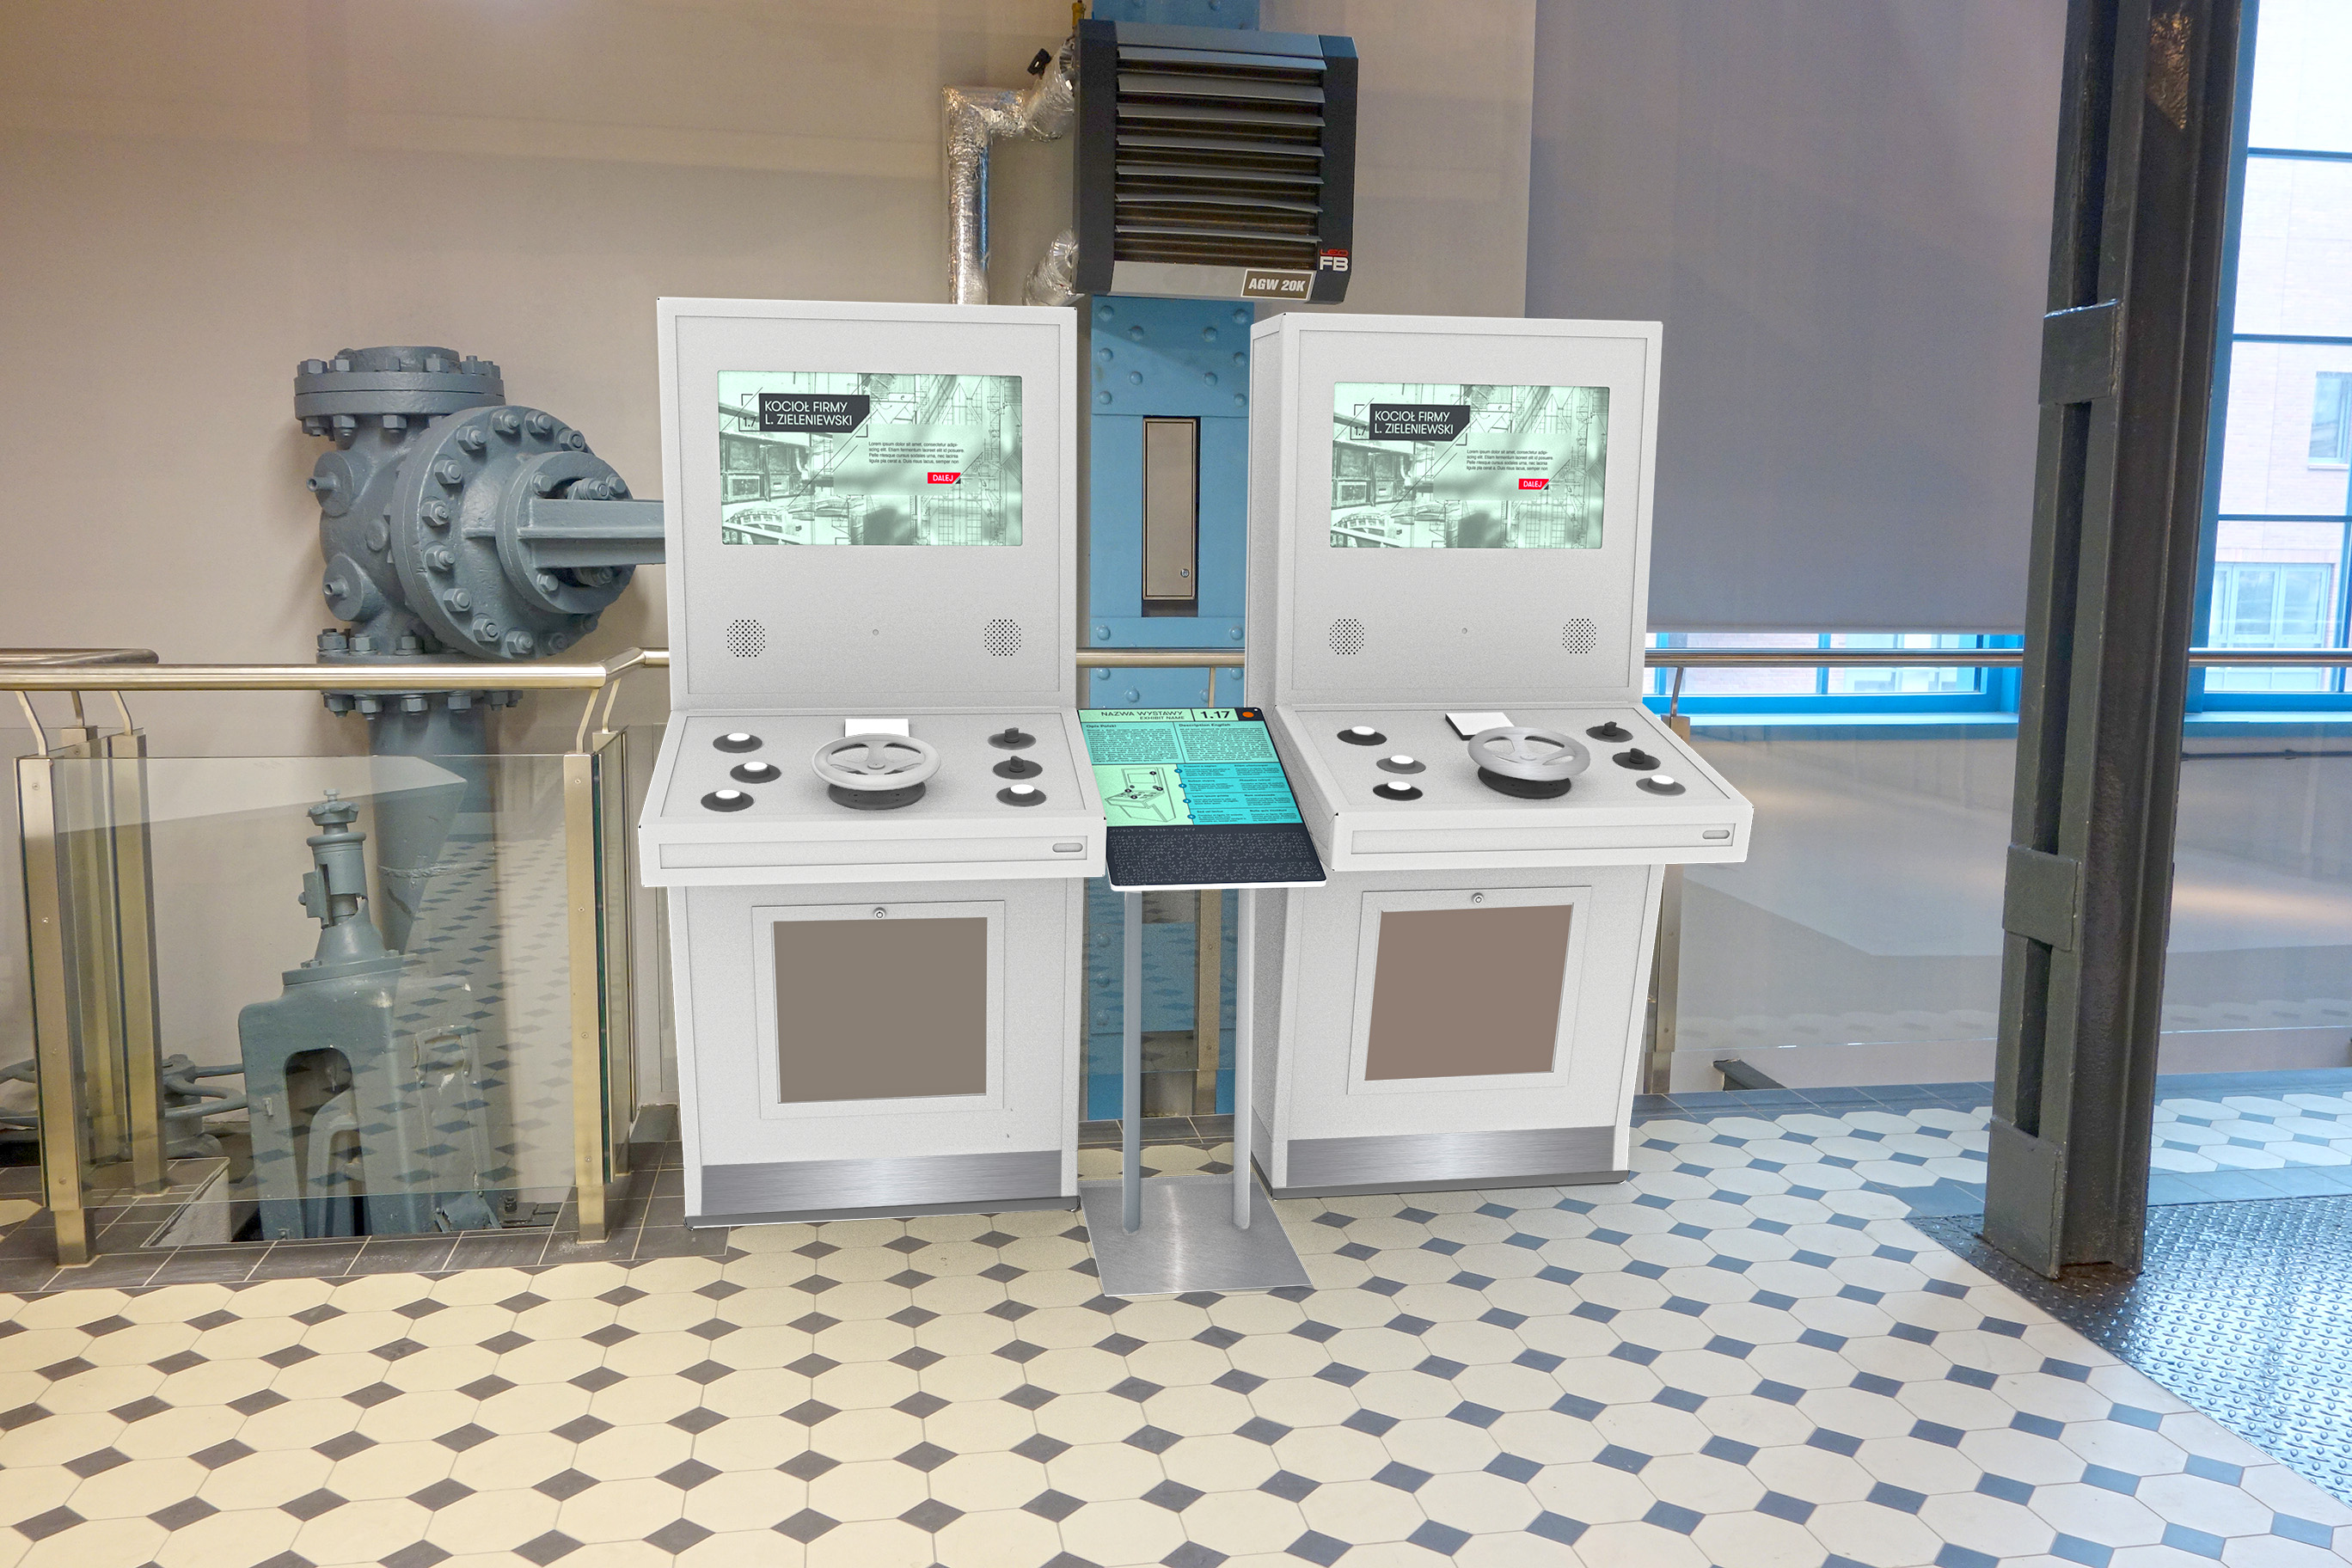 Visualisation of equipment in Science Center